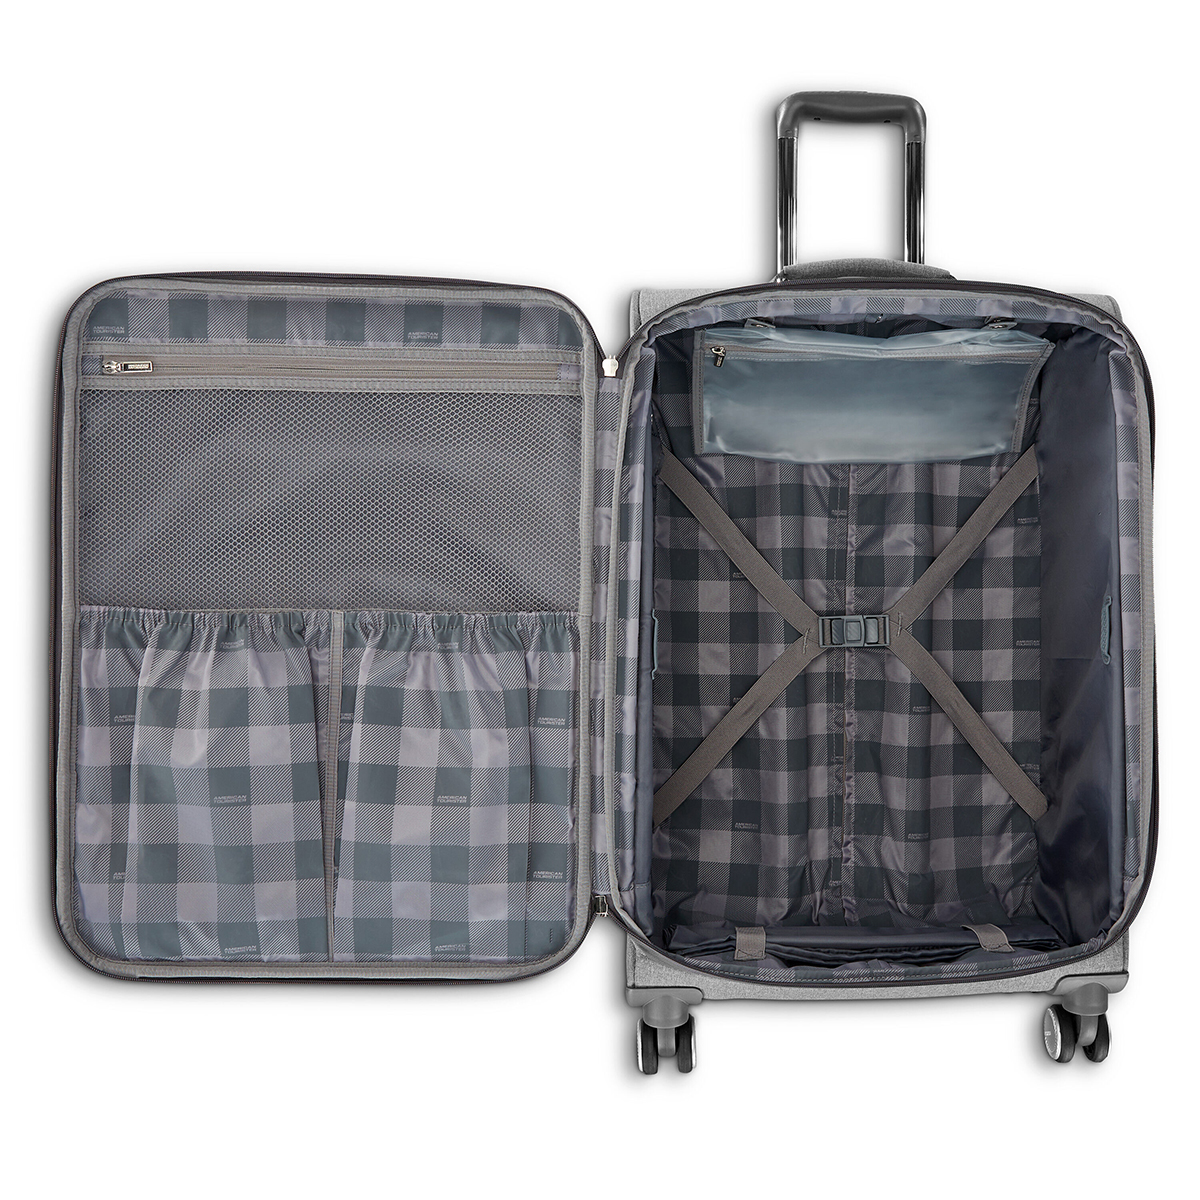 American Tourister(R) Whim 29in. Spinner Luggage